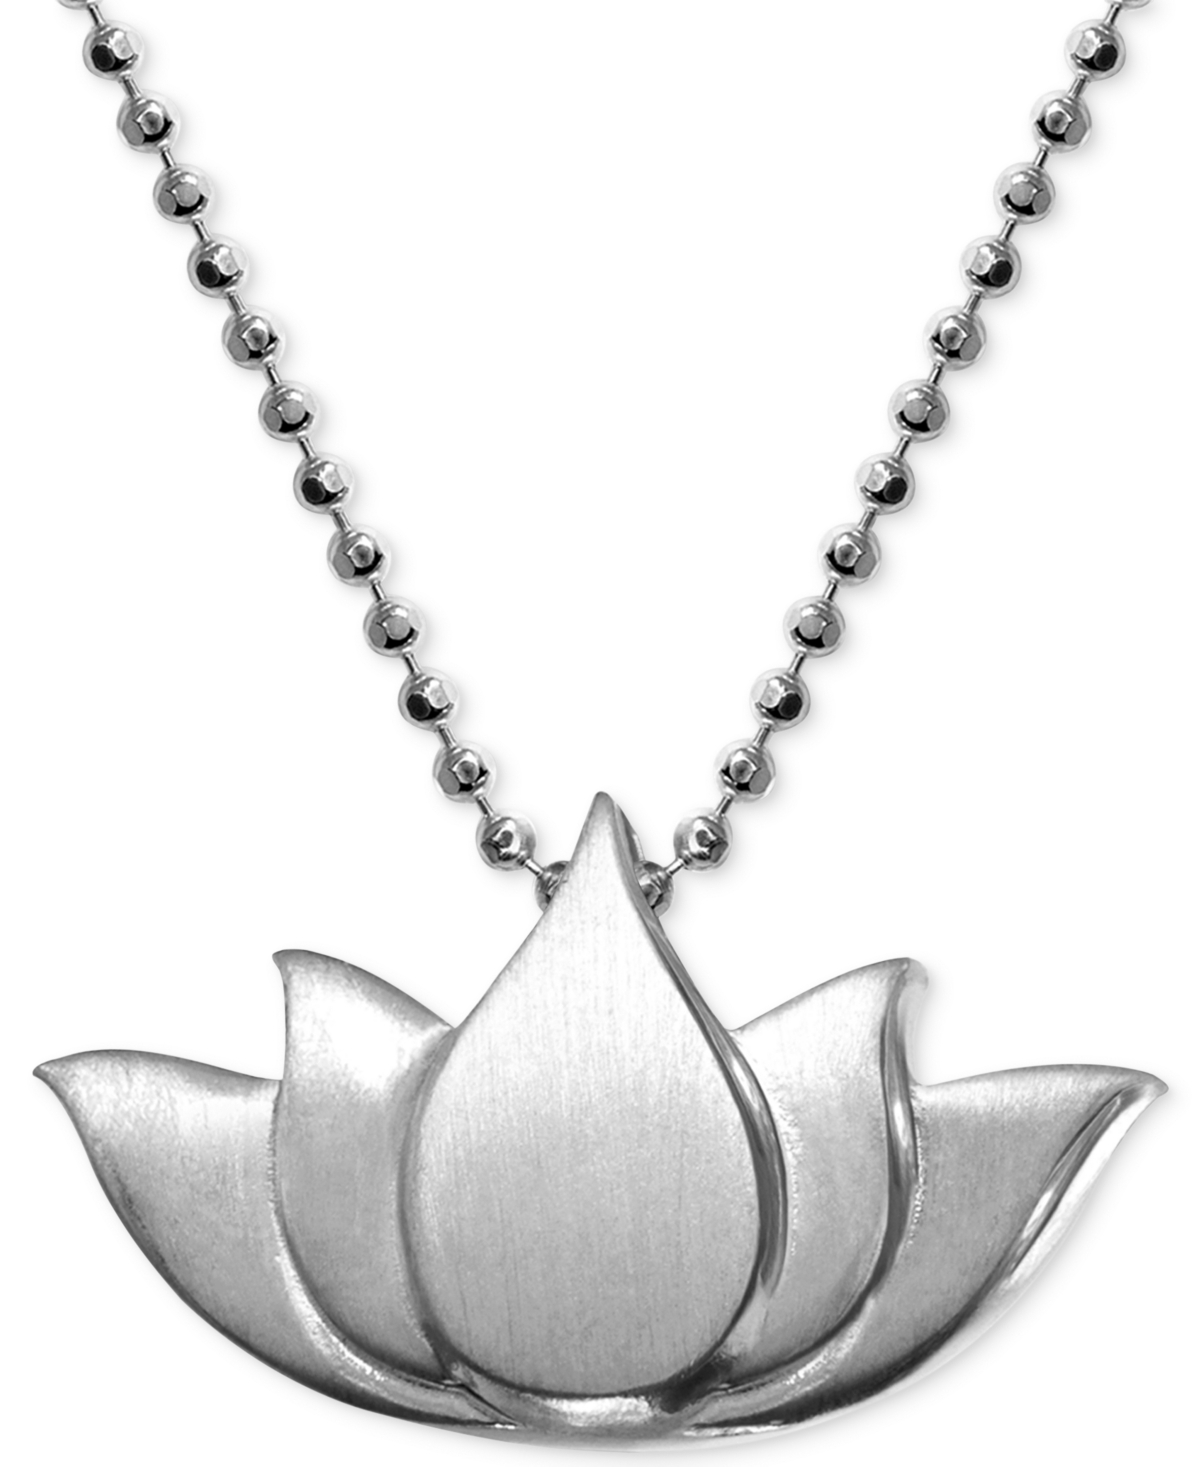 Little Faith Lotus Blossom Pendant Necklace in Sterling Silver - Sterling Silver